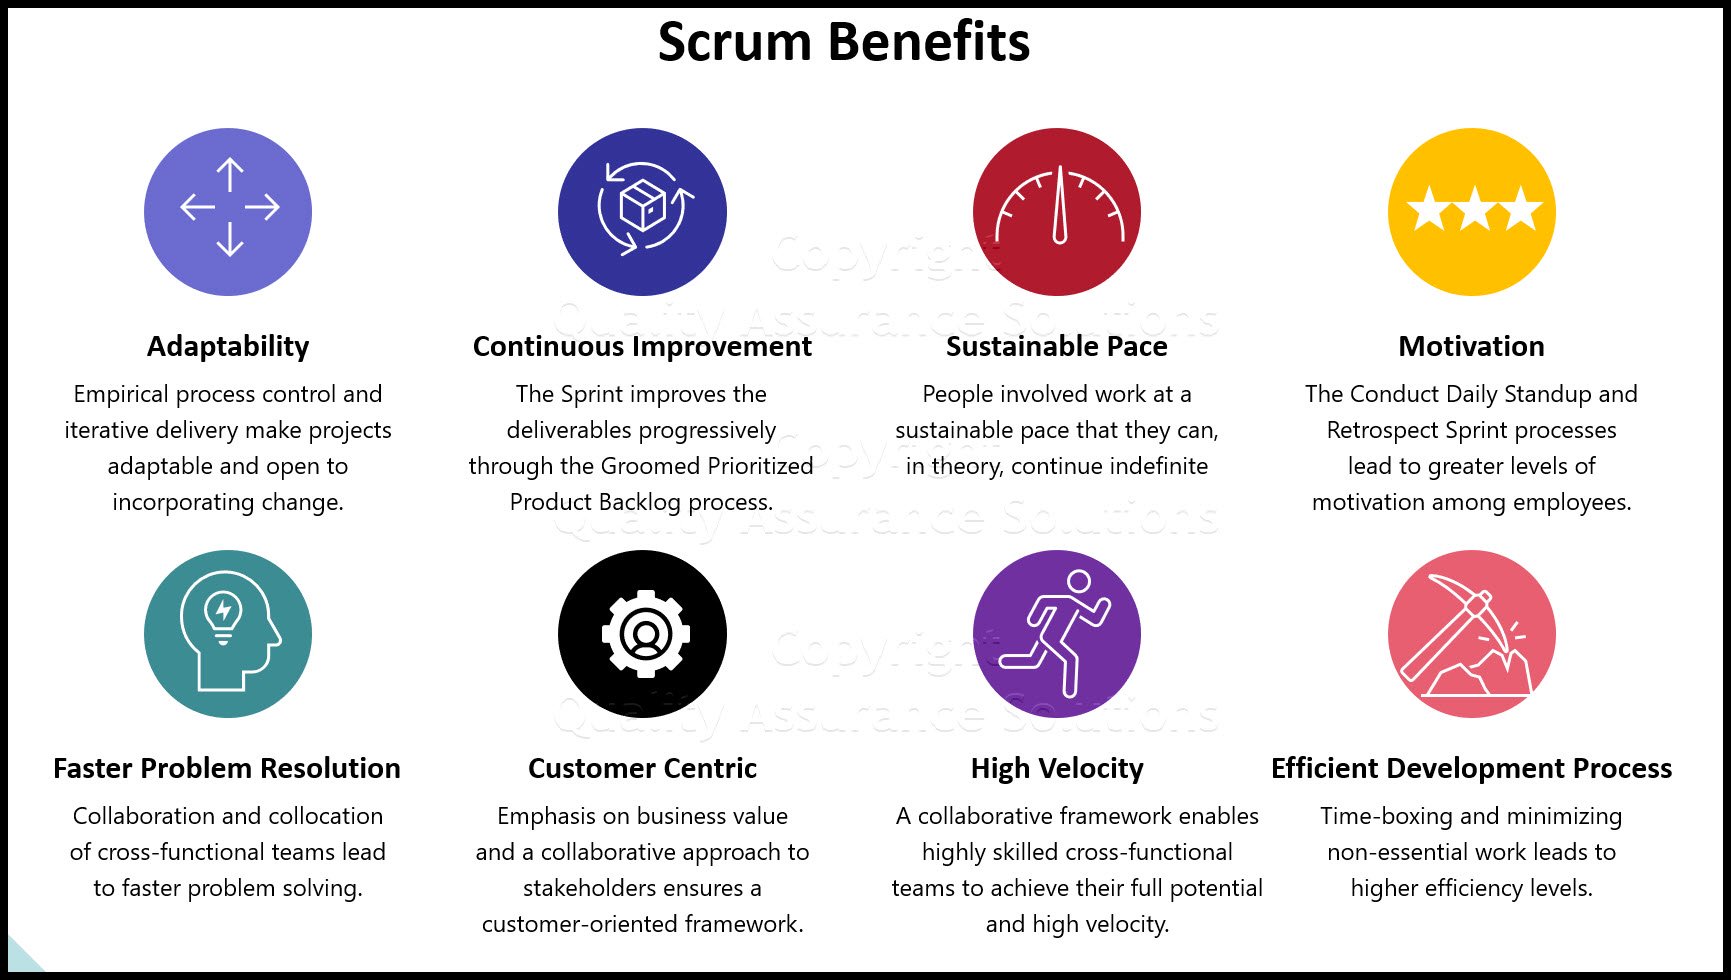 Learn the scrum tool, article provides an overview, history, reasons for using it, and discusses scalability